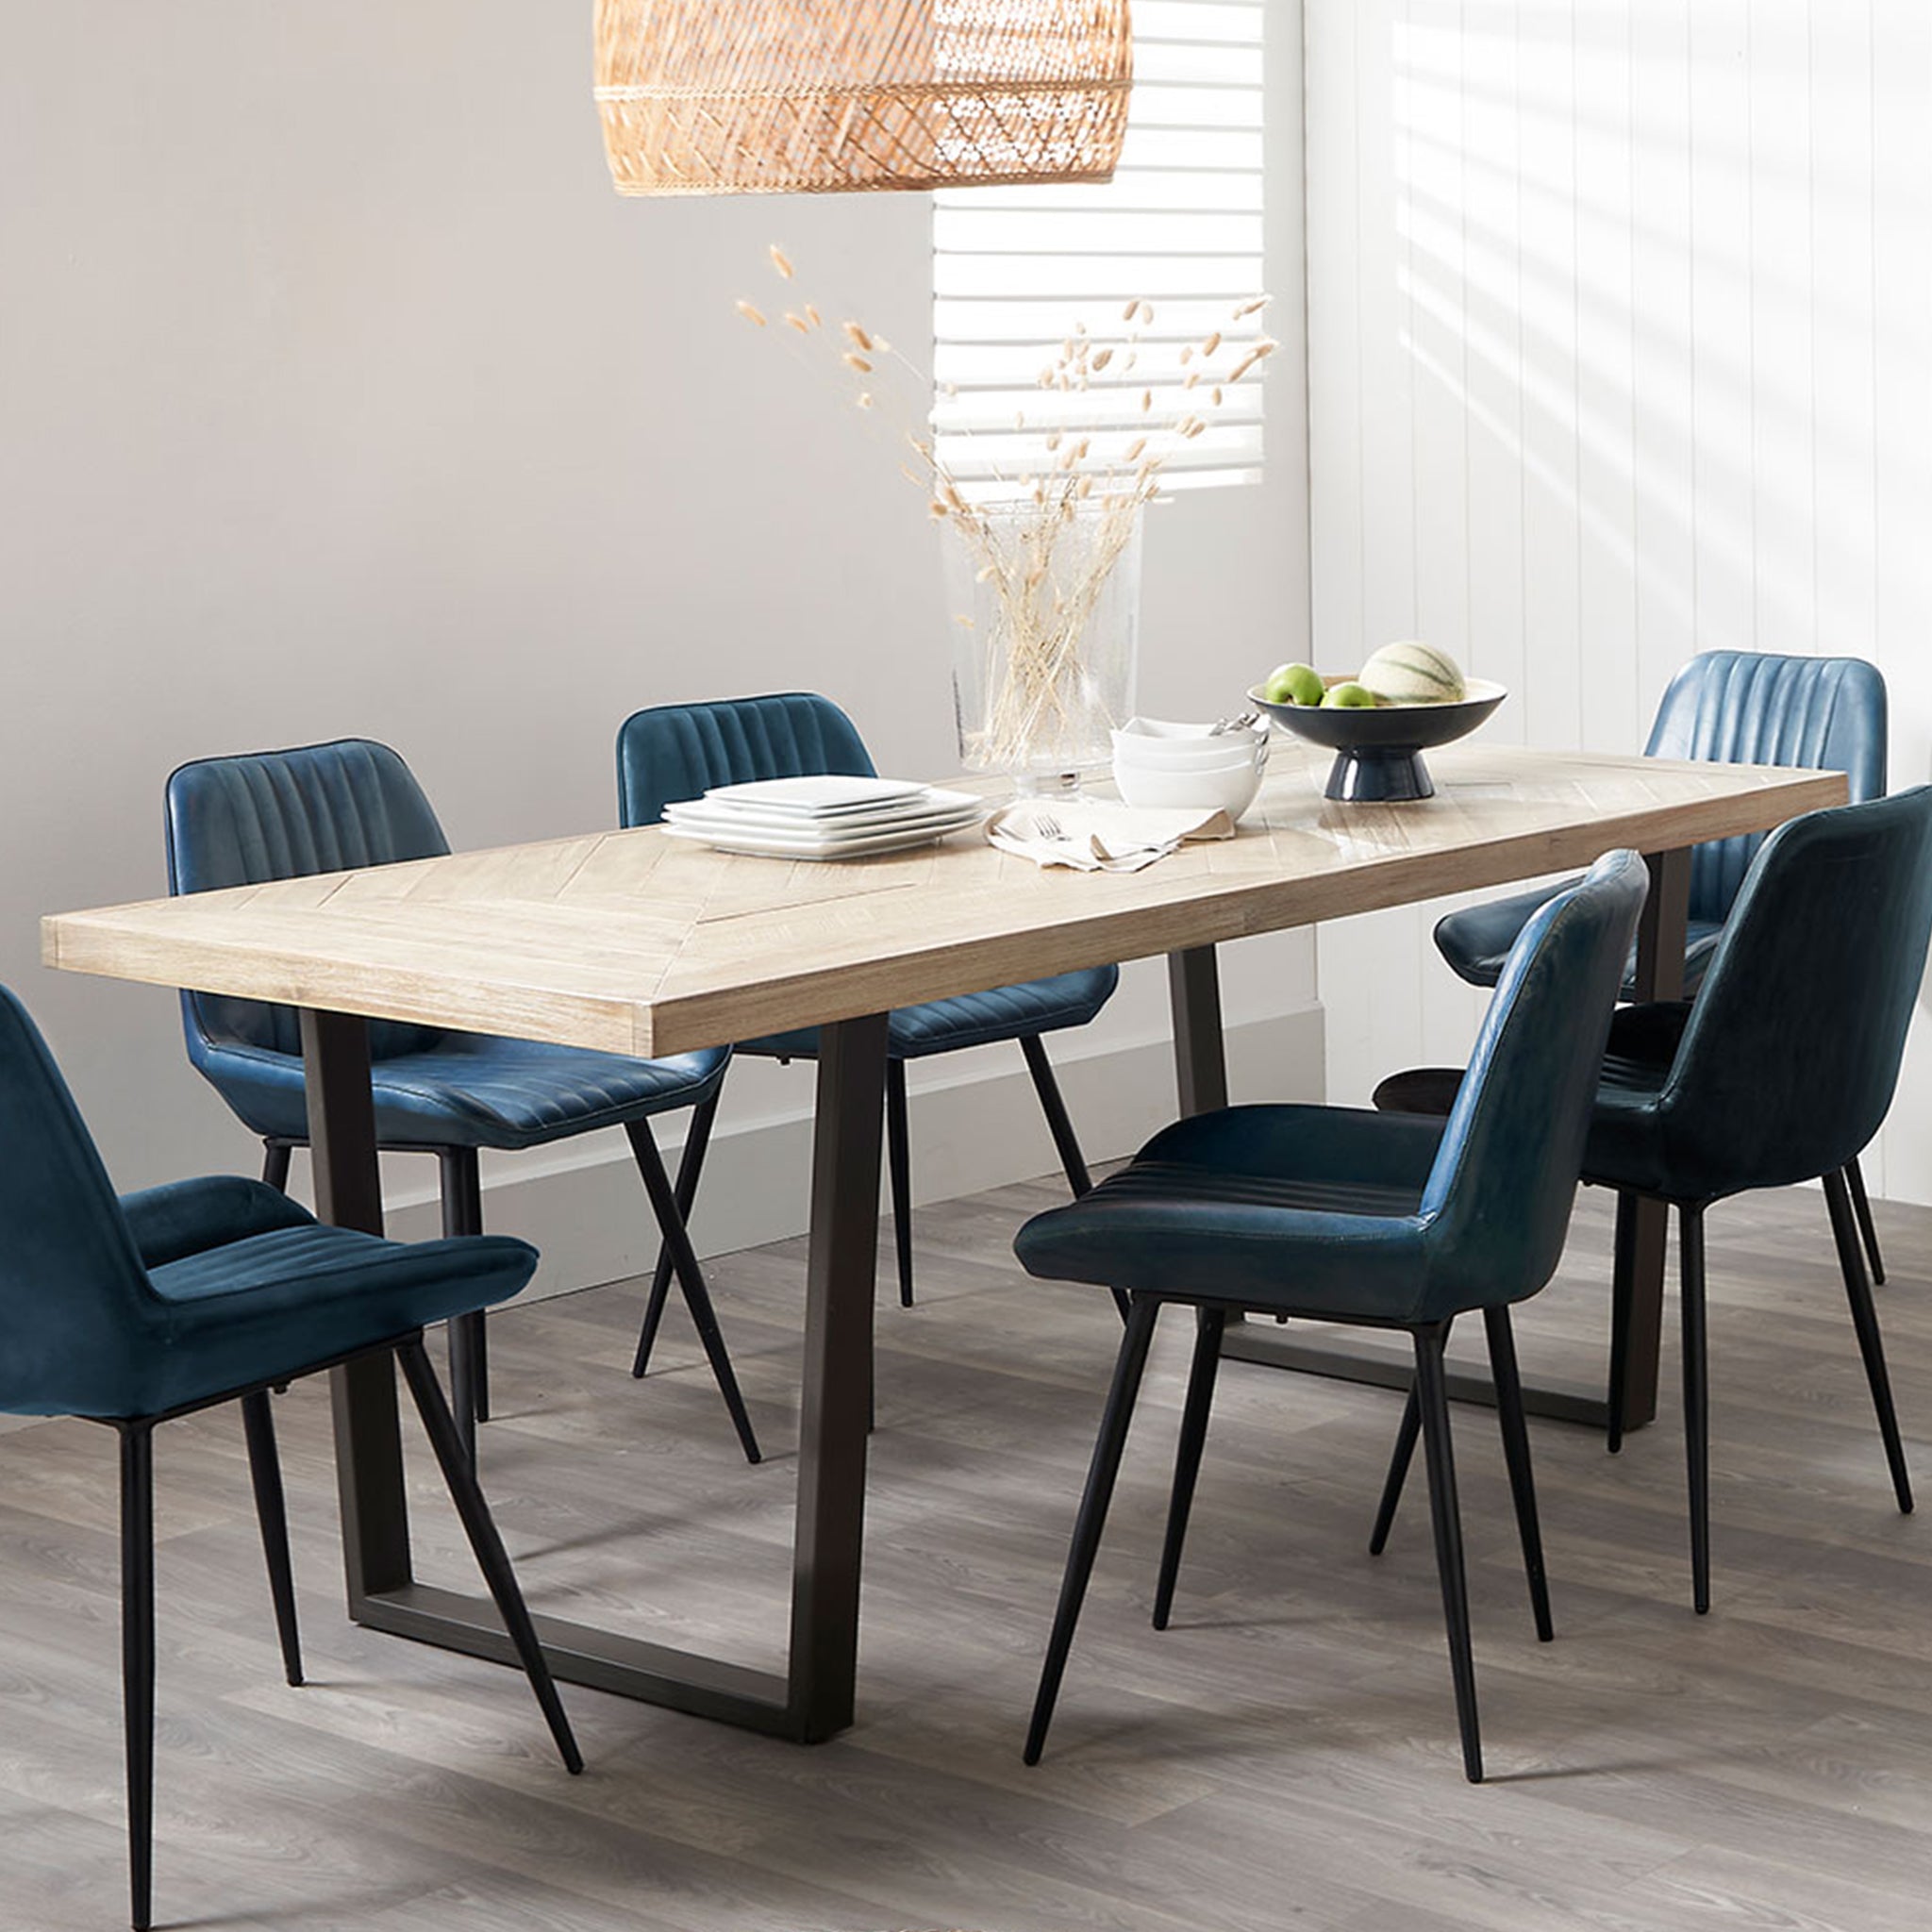 Dining Table & Chairs - Harbour Lifestyle